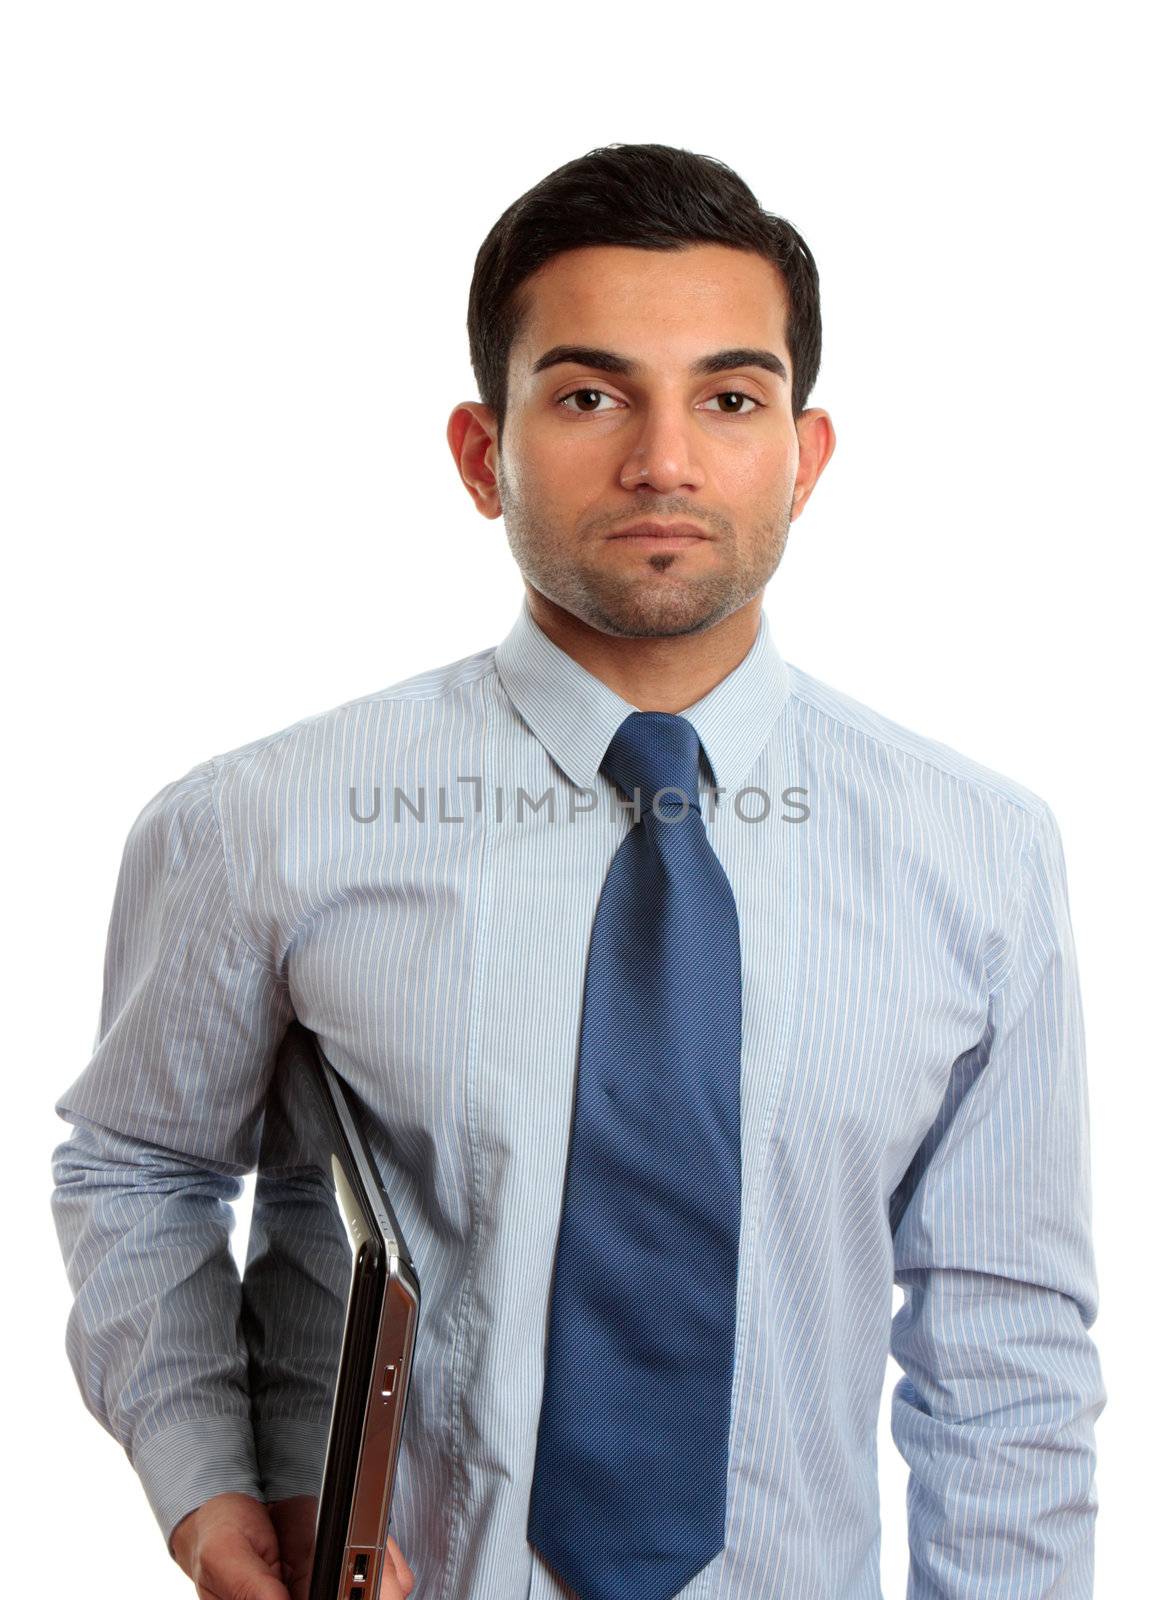 A businessman, IT consultant or IT technician wearing shirt and tie and holding a laptop computer.  White background.